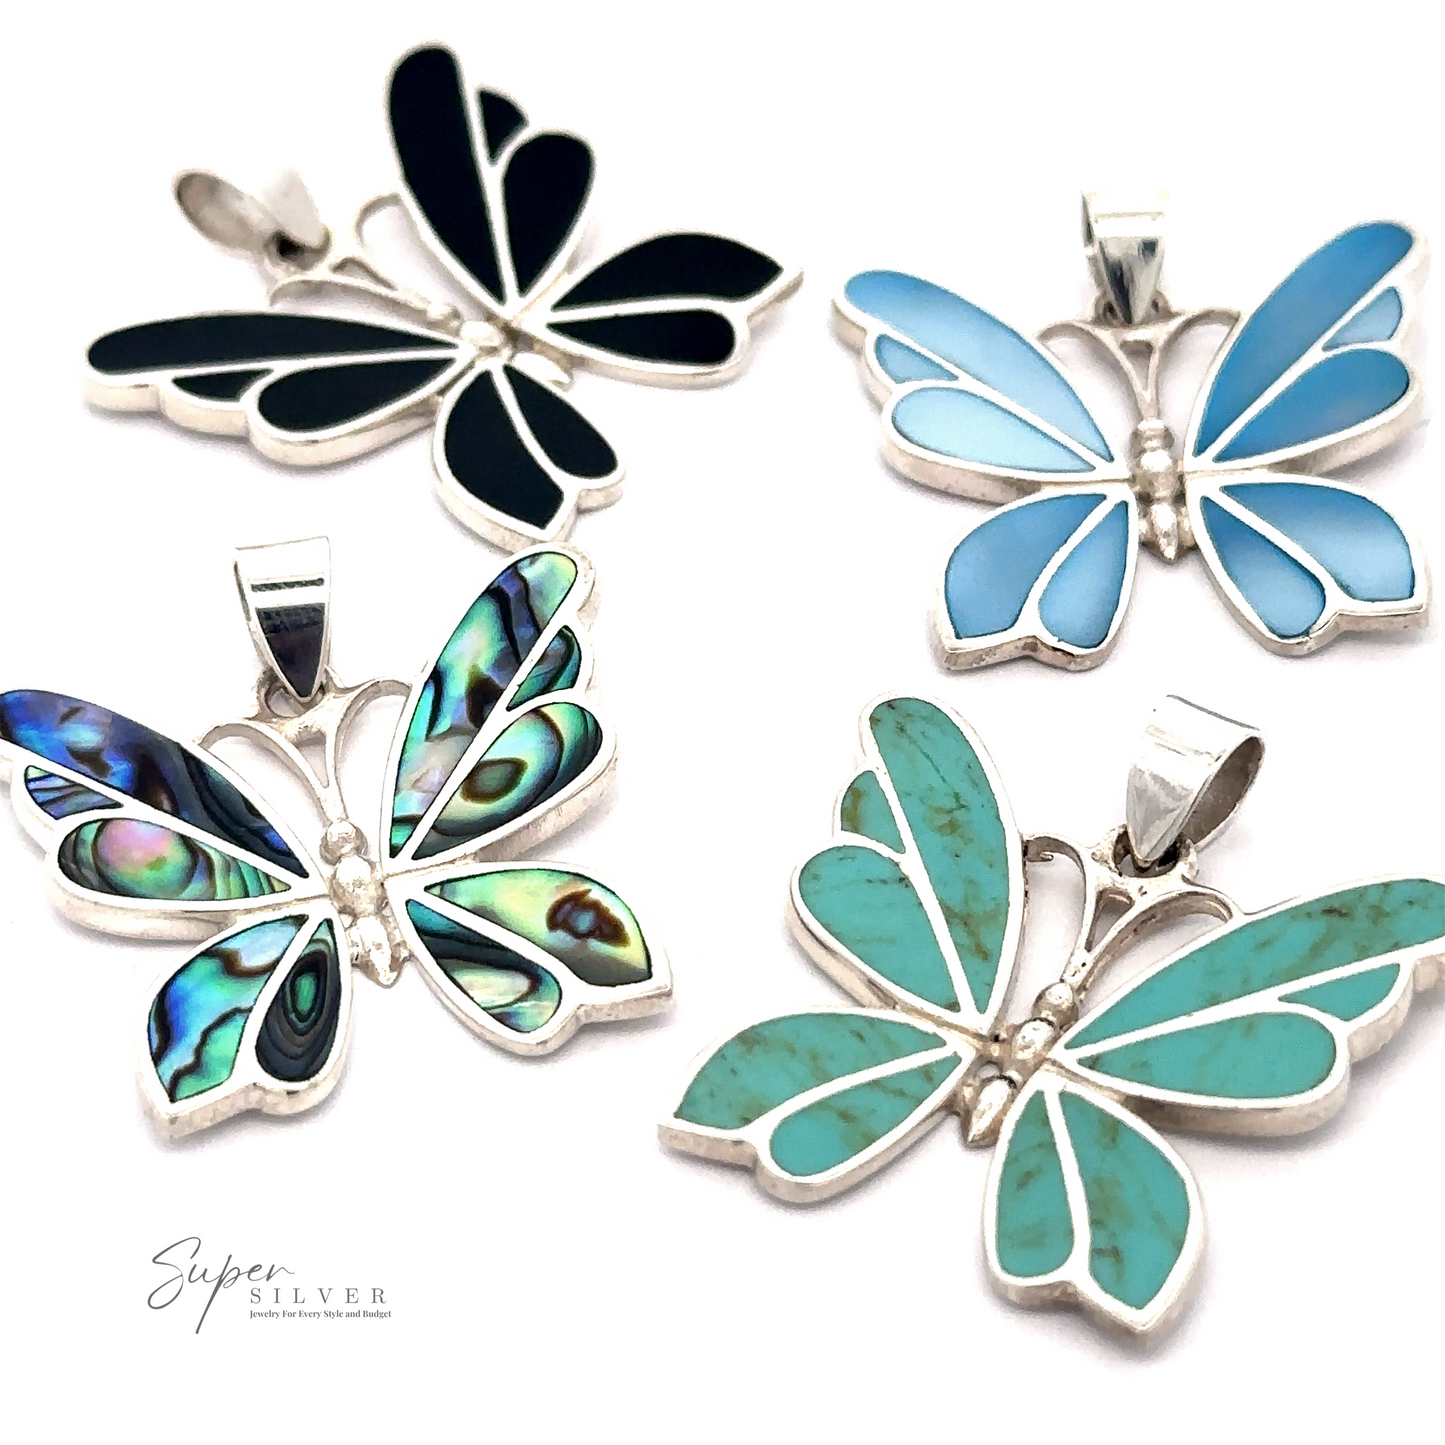 Four Medium Inlay Butterfly Pendants with different colored inlays (black, blue, abalone, and turquoise) on a white background. The brand "Super Silver" is noted in the lower left corner. These exquisite gemstone pendants add a touch of elegance to any collection.